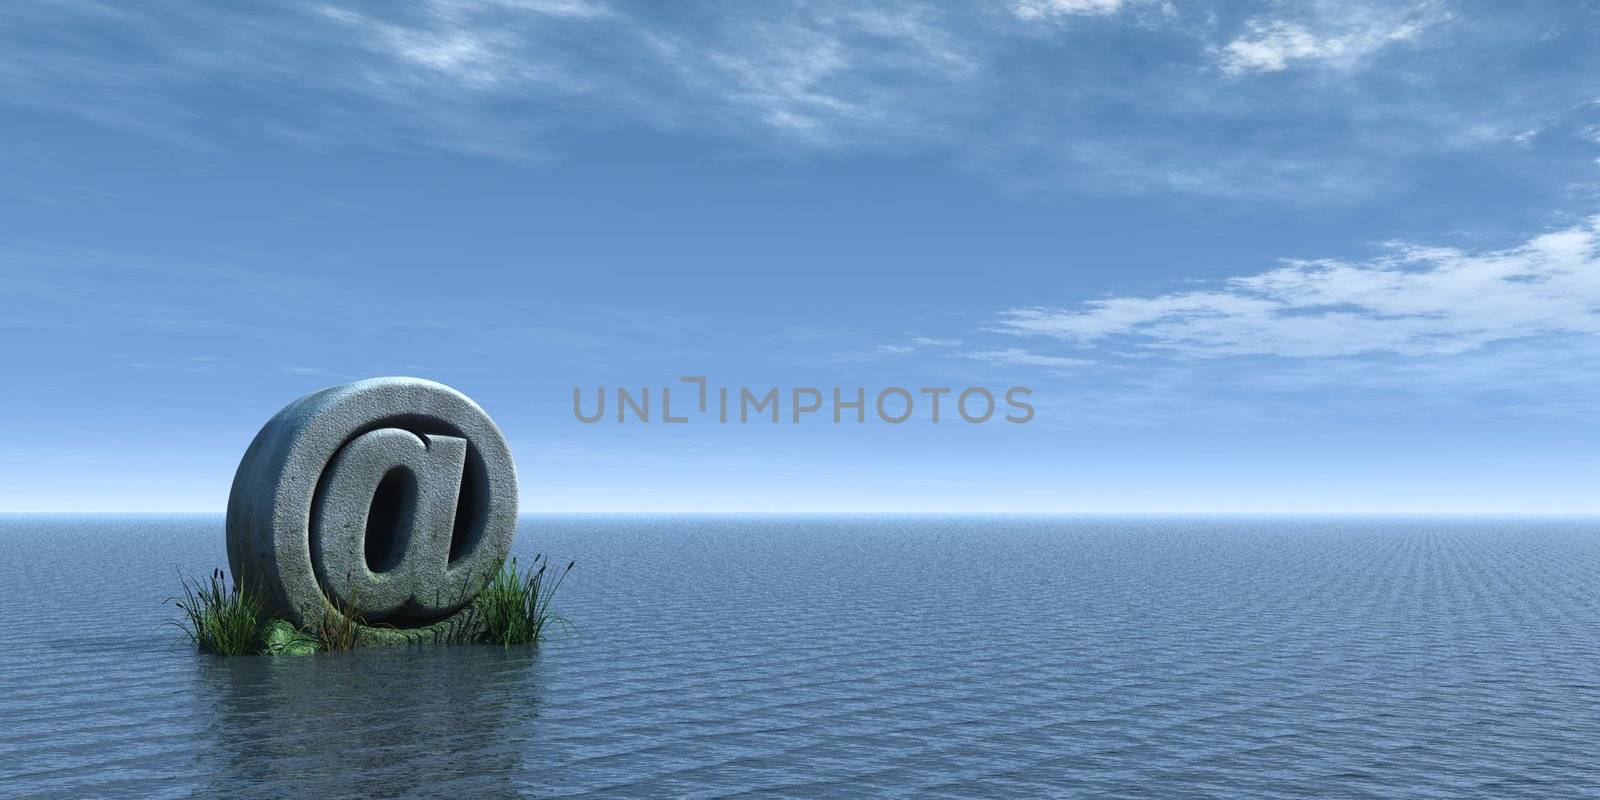 email alias rock at the ocean - 3d illustration